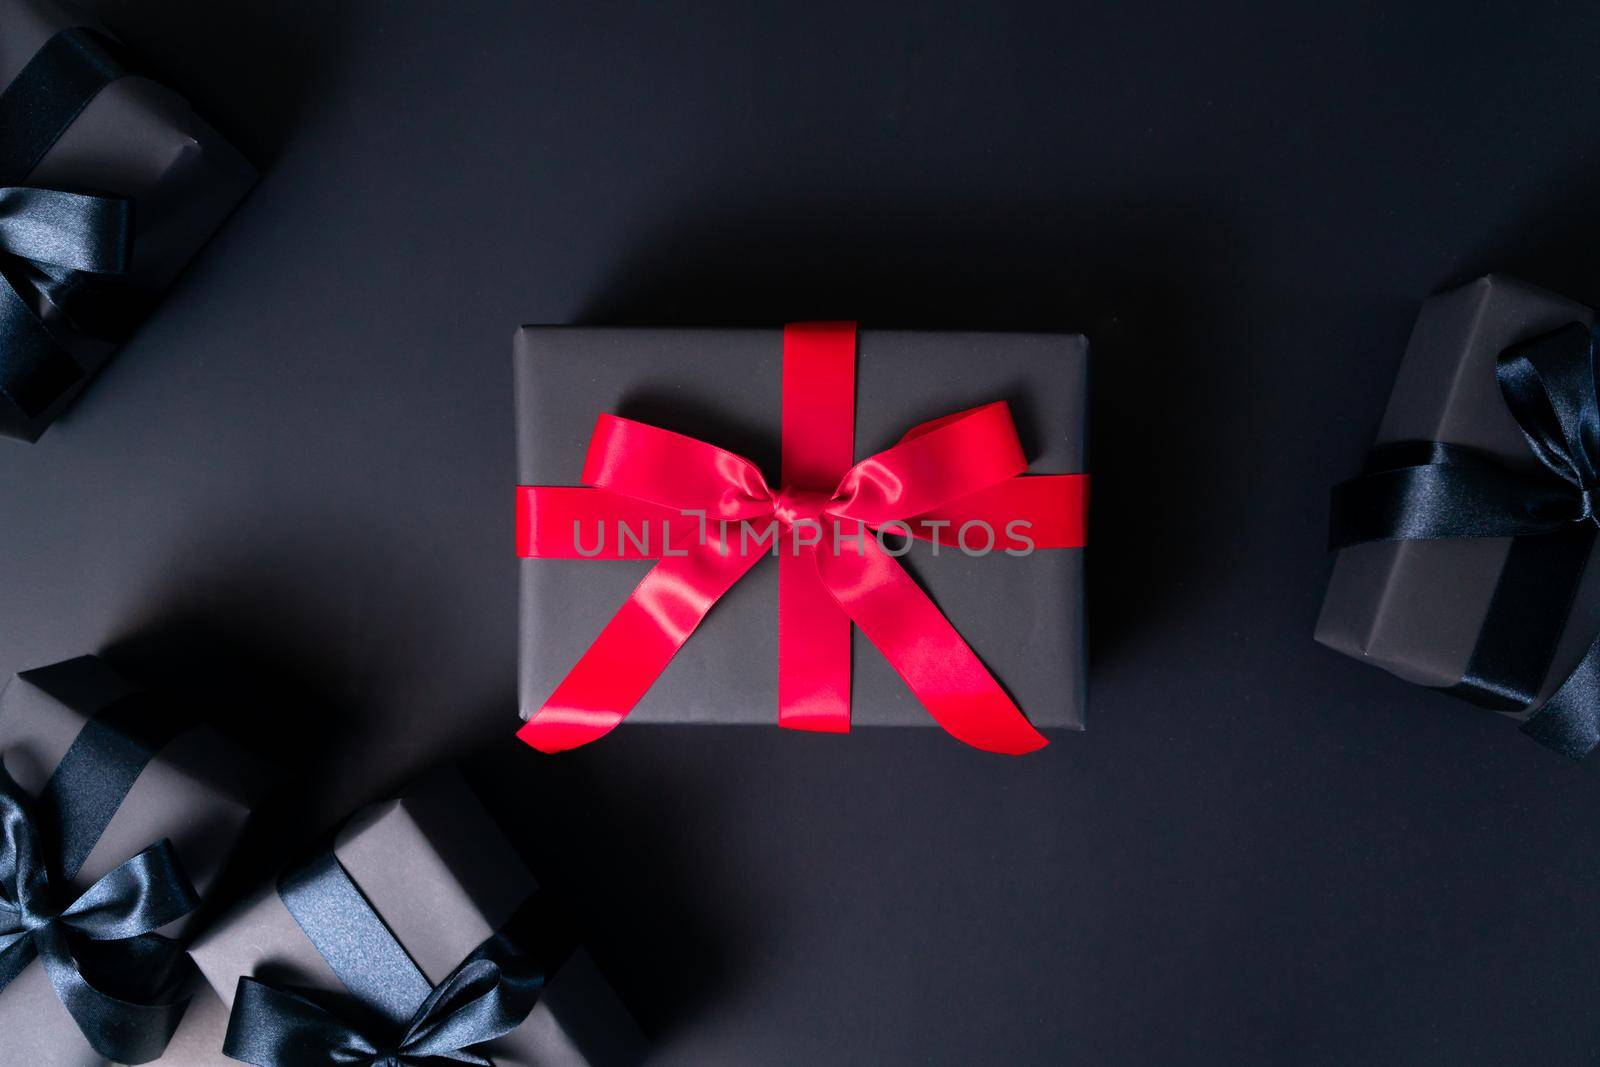 Black Friday sale, black gift box for online shopping by psodaz